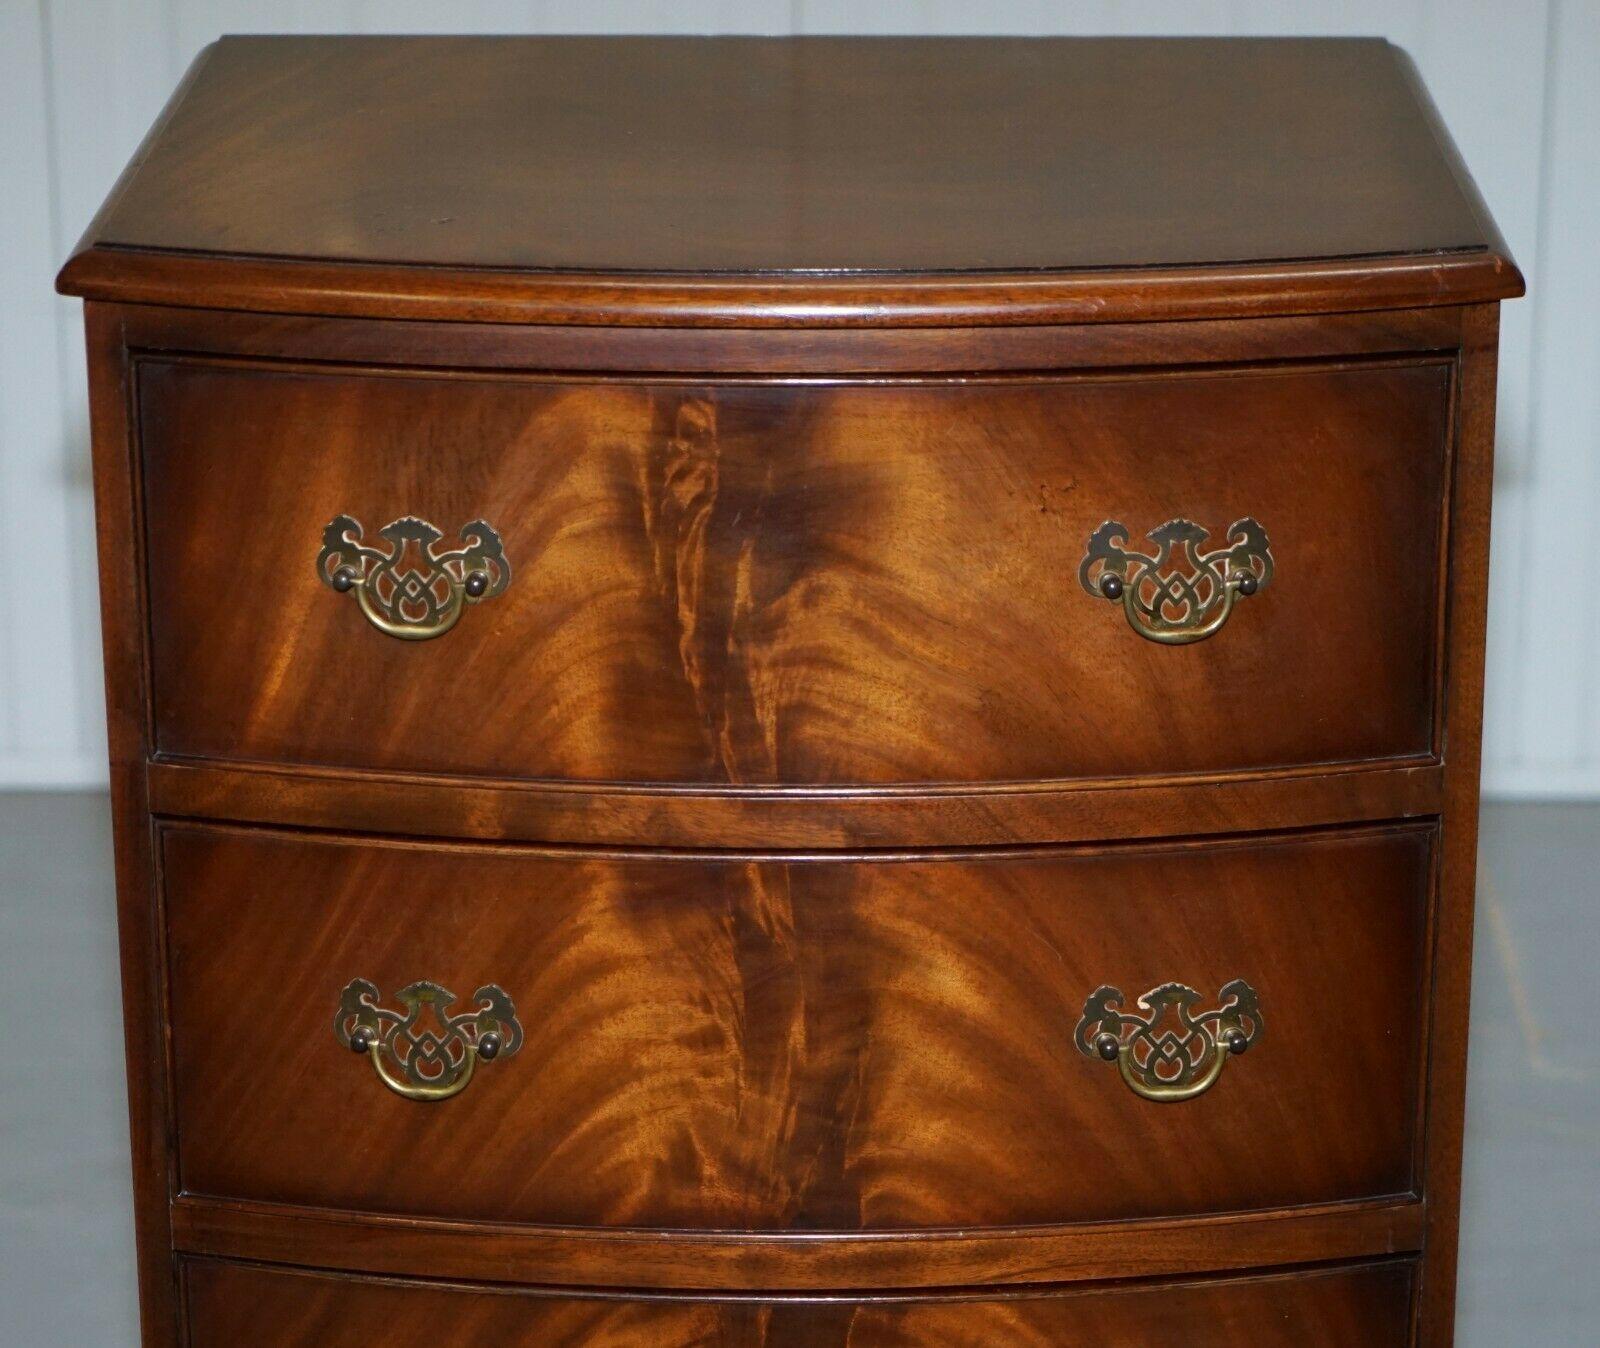 English Vintage 1960s Burton Furniture Ltd Flamed Mahogany Side Table Chest of Drawers